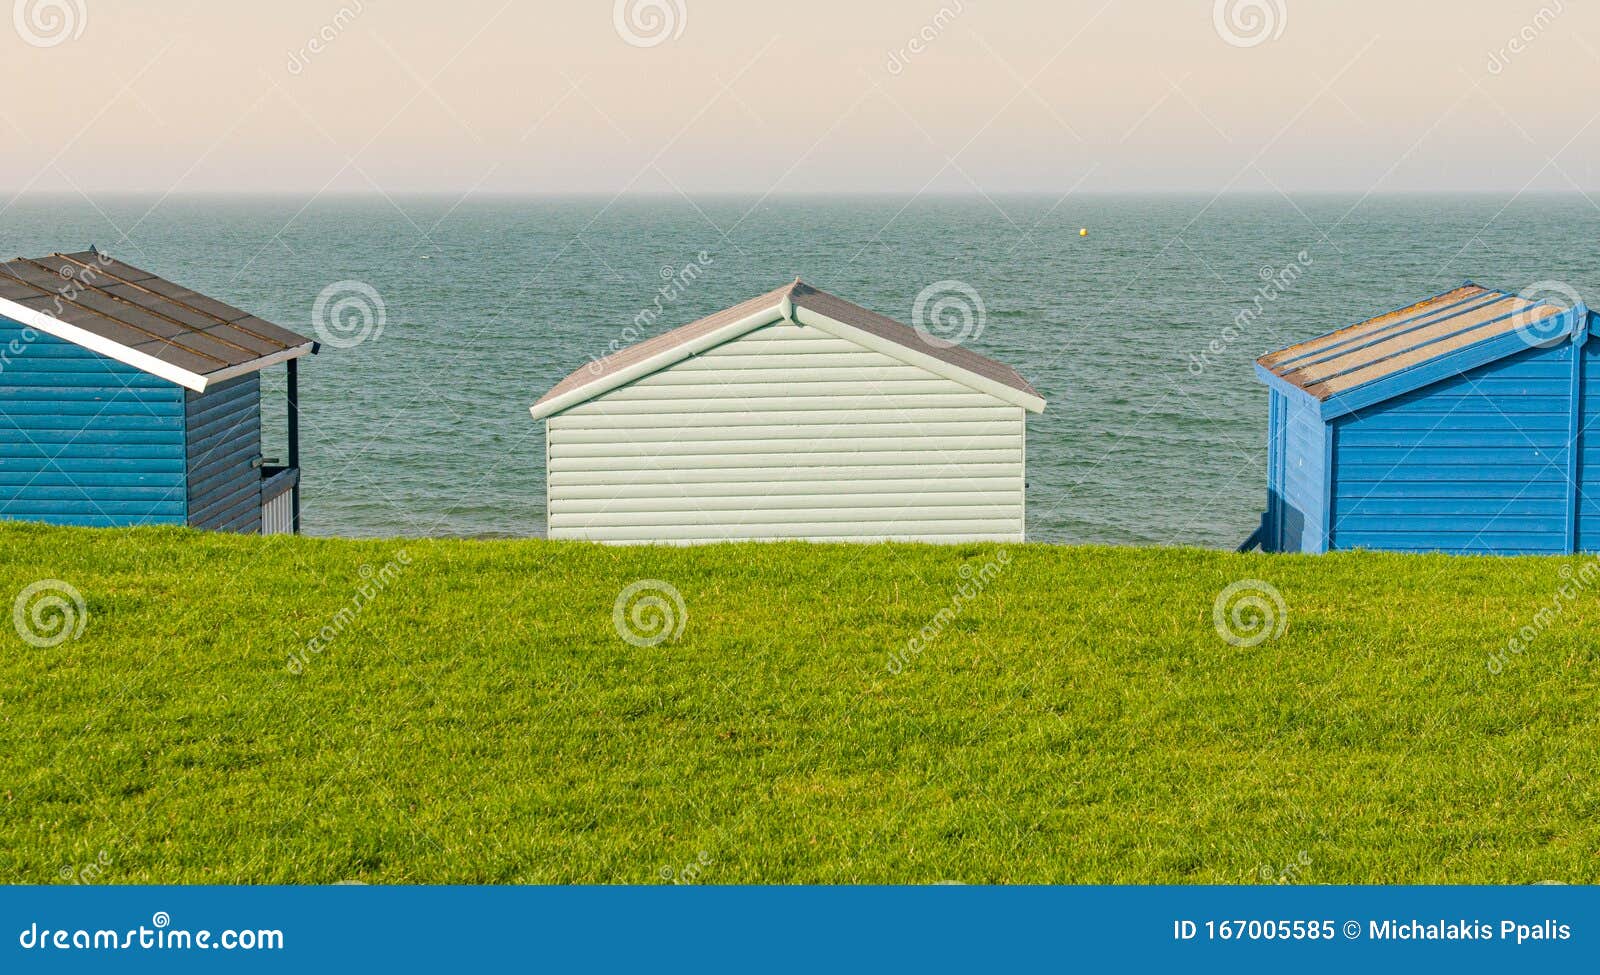 Colourful Holiday Wooden Beach Huts Facing The Calm Ocean Stock Image